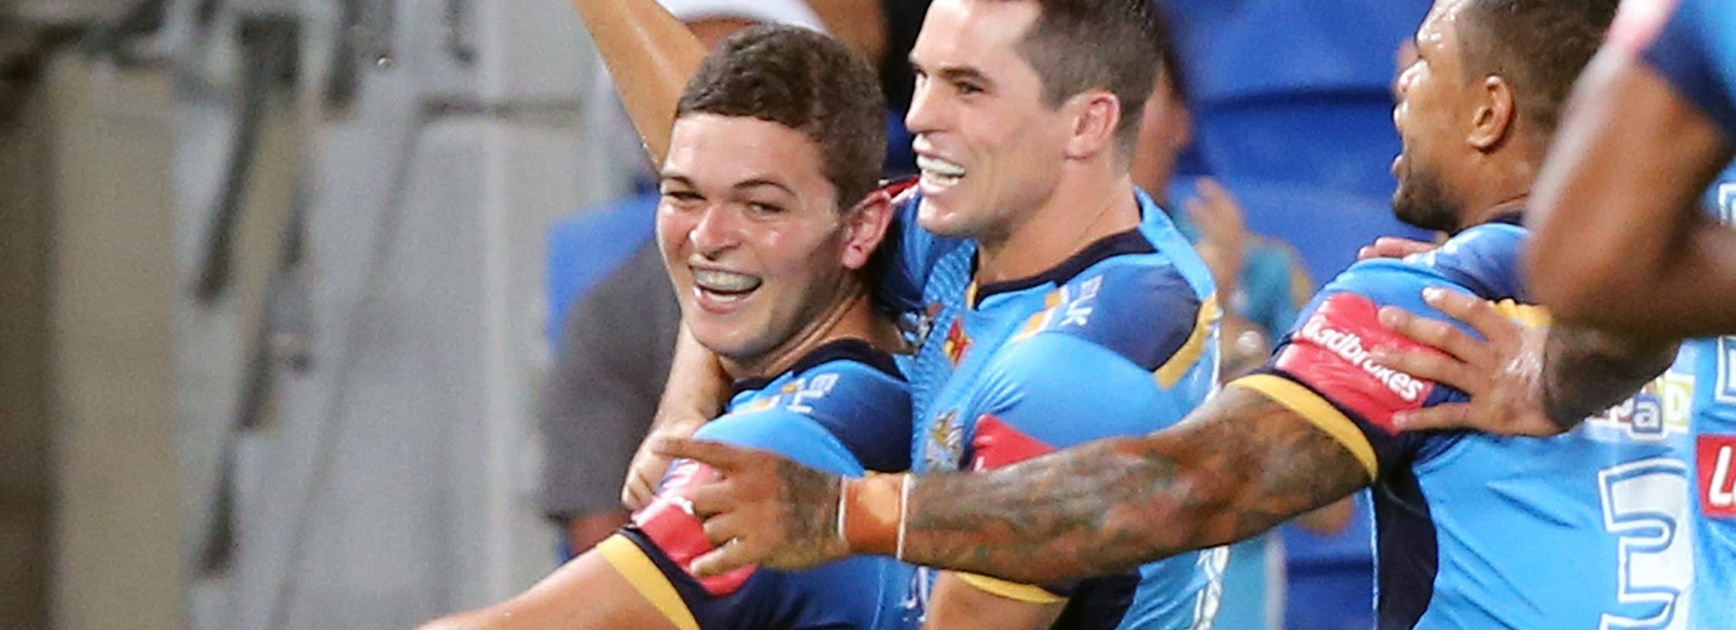 Ashley Taylor scored a try against Wests Tigers in Round 3.